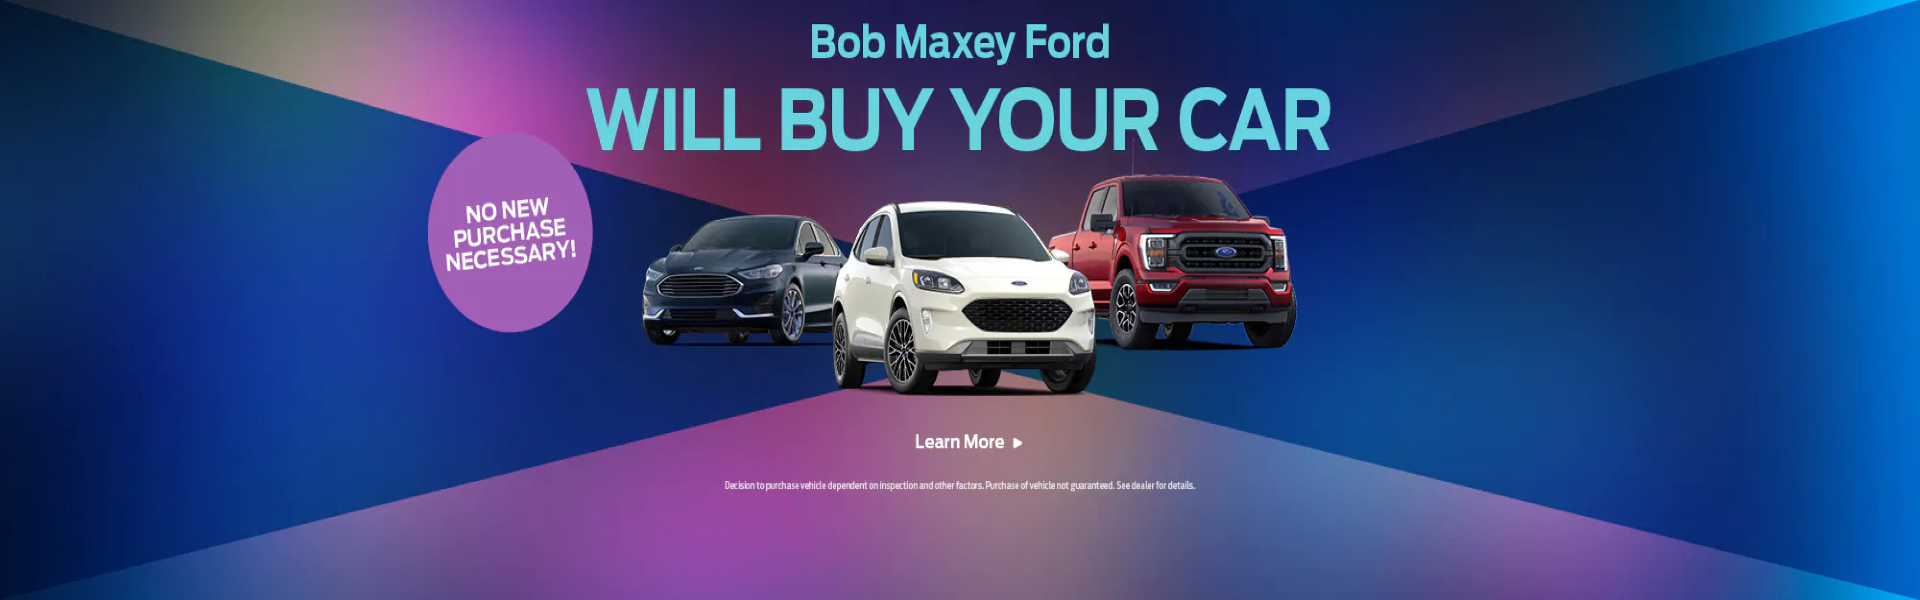 Will buy your car